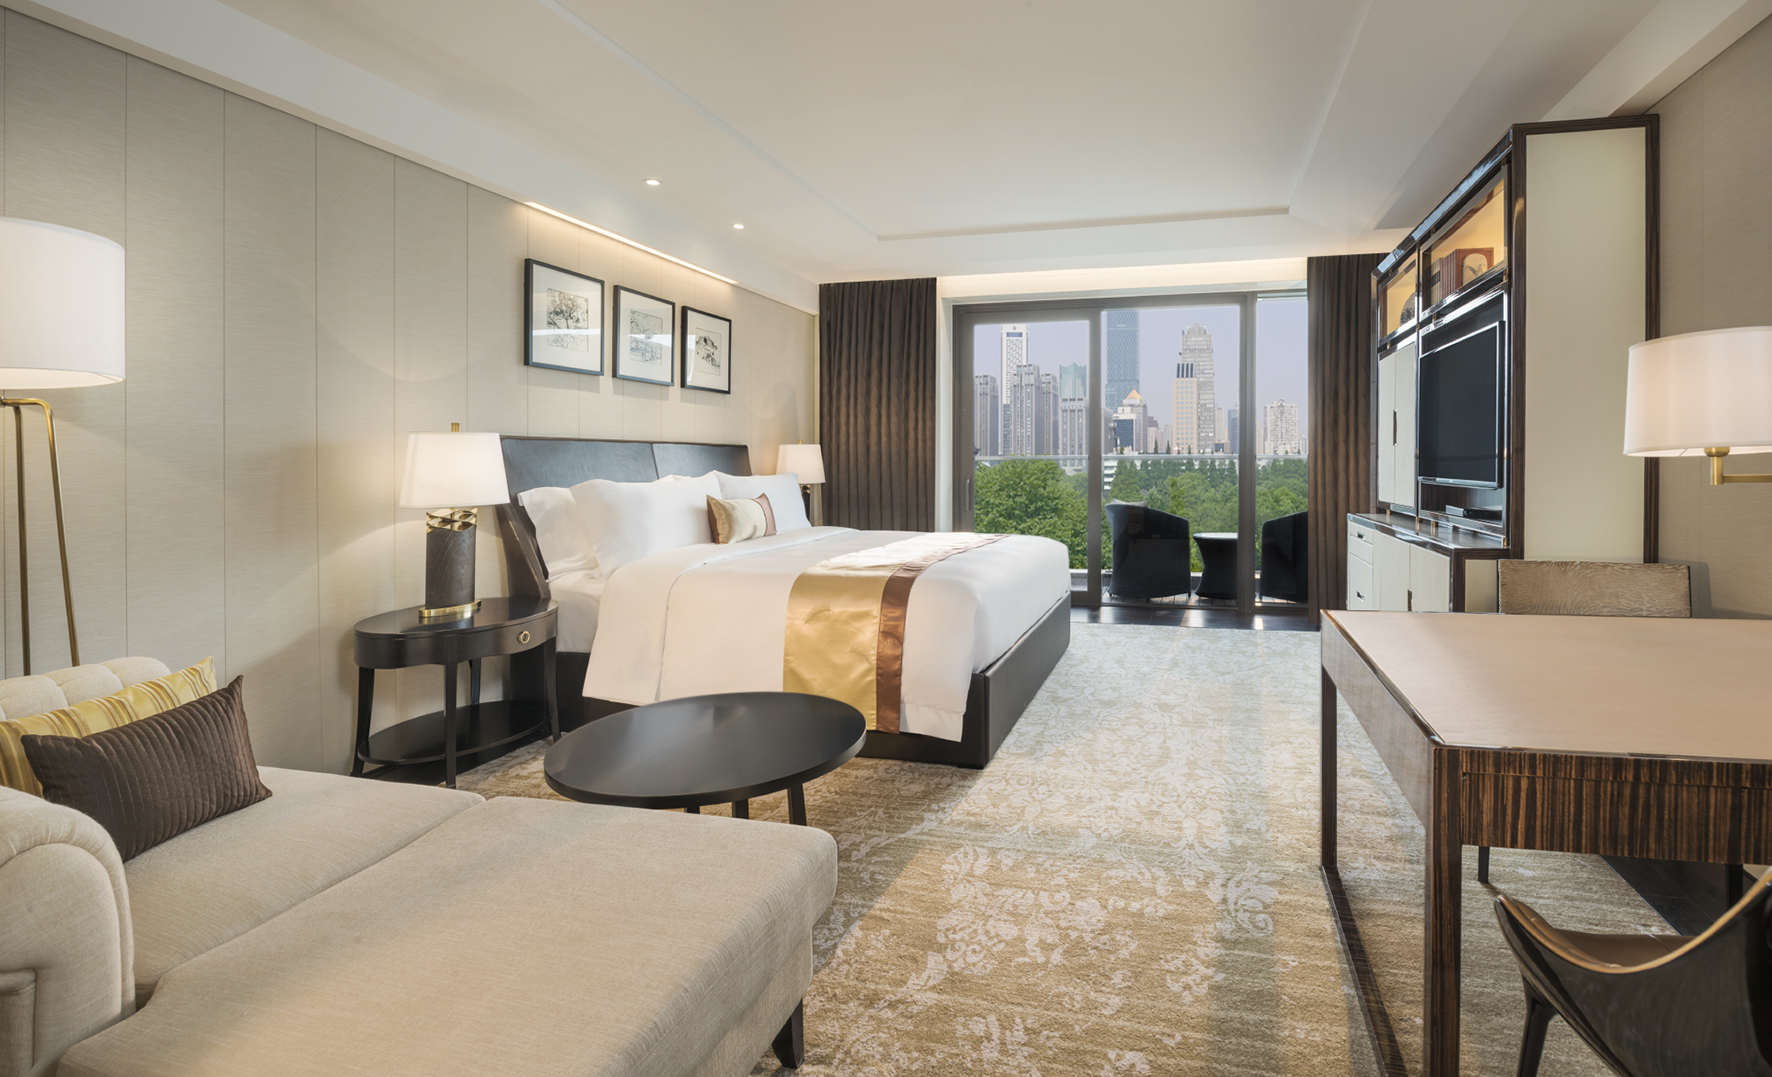 The Superior Deluxe Room at The Grand Mansion features a view of the city.